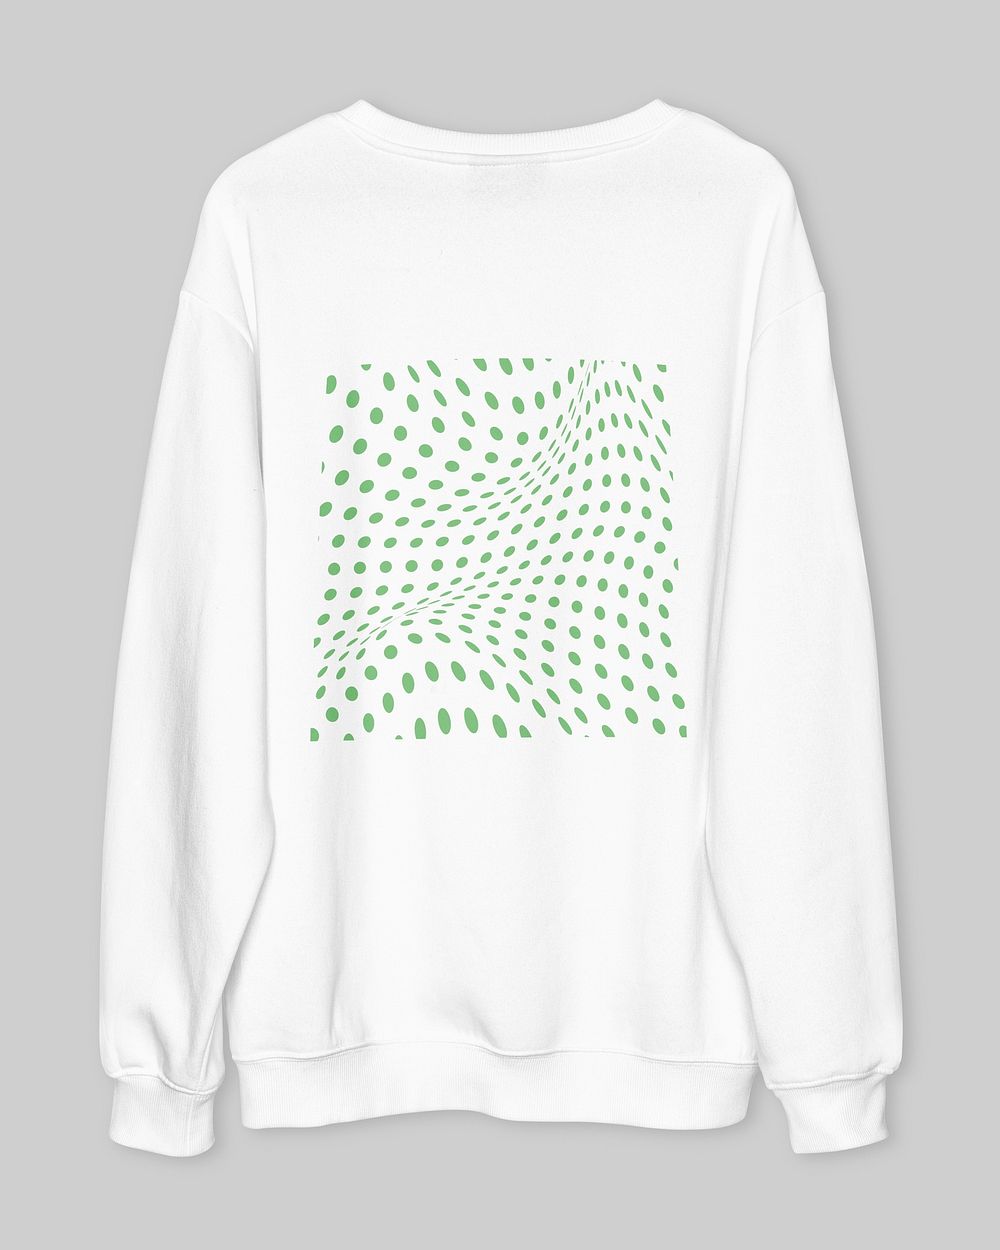 White sweater, casual apparel with design space